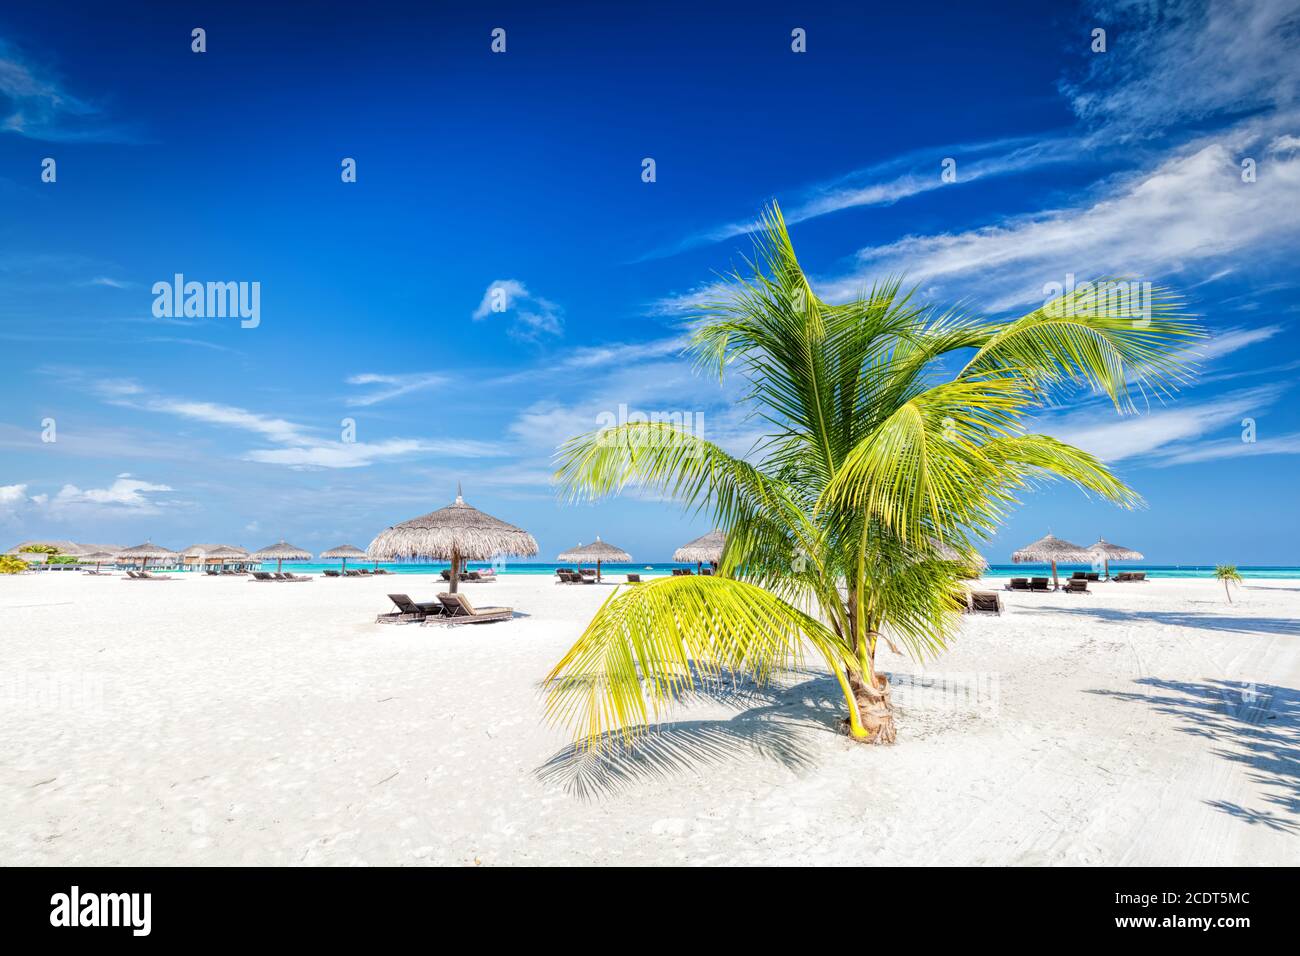 Beach with coconut palms and deckchairs on a small island resort in Maldives Stock Photo